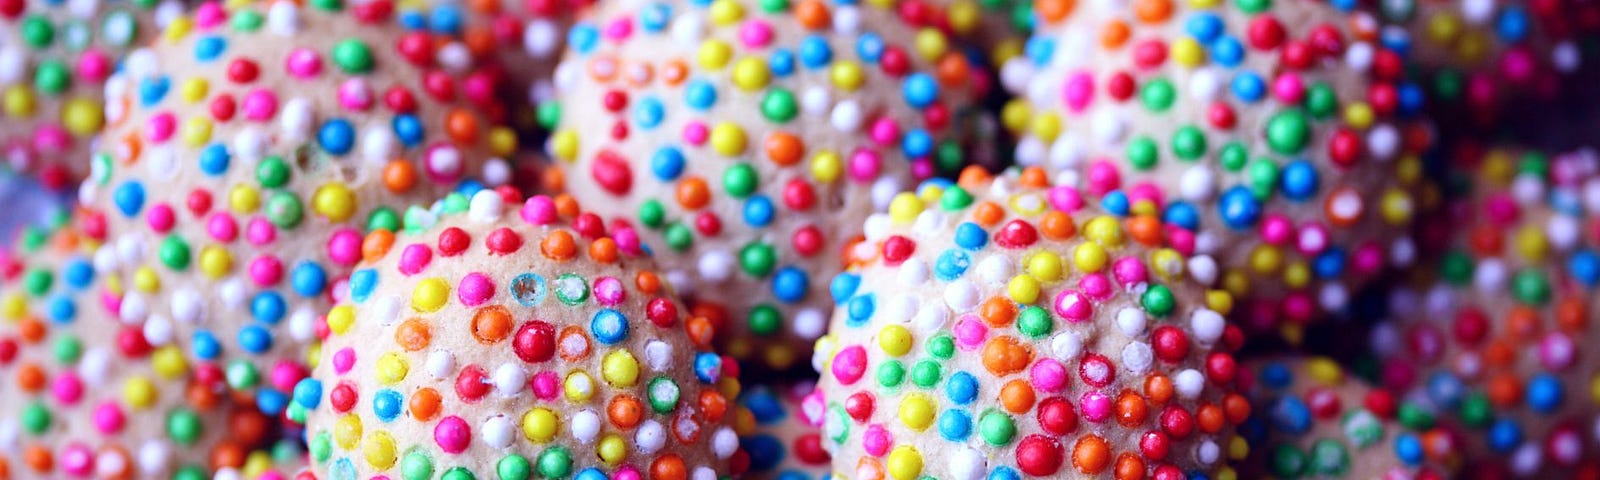 Pink balls of confectionery covered in multi-coloured hundreds and thousands.